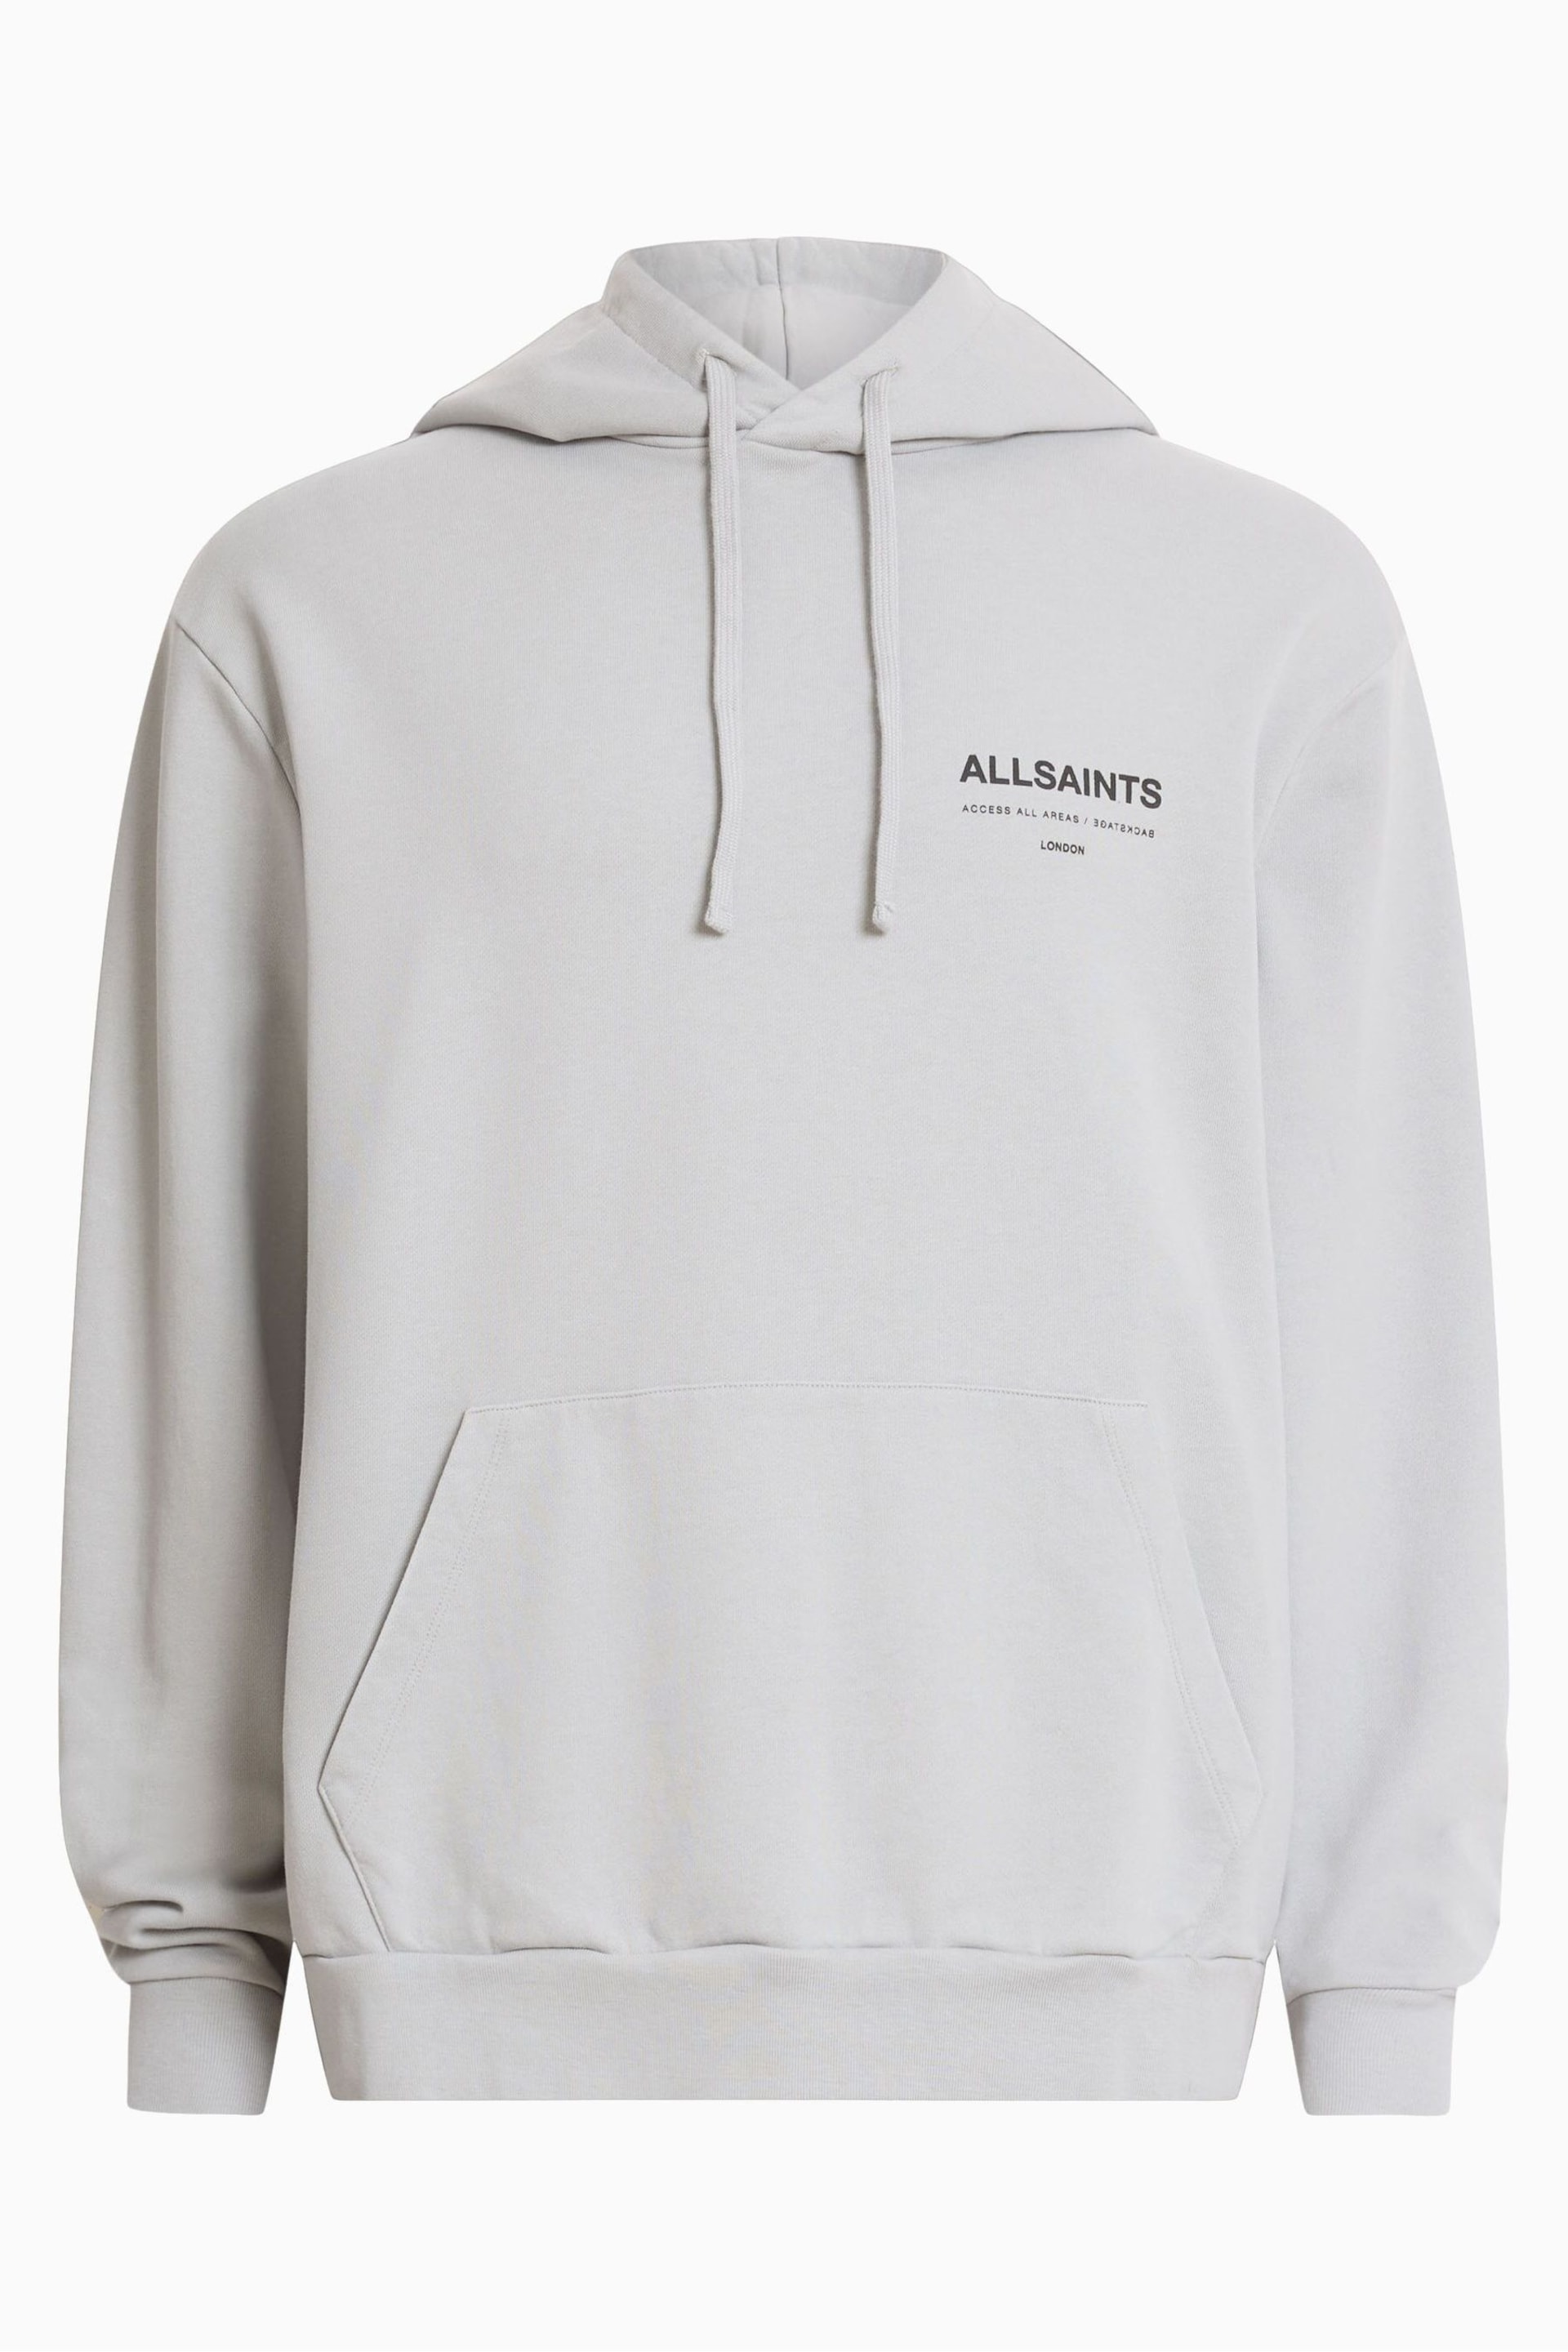 AllSaints Grey Access Over The Head Hoodie - Image 8 of 8